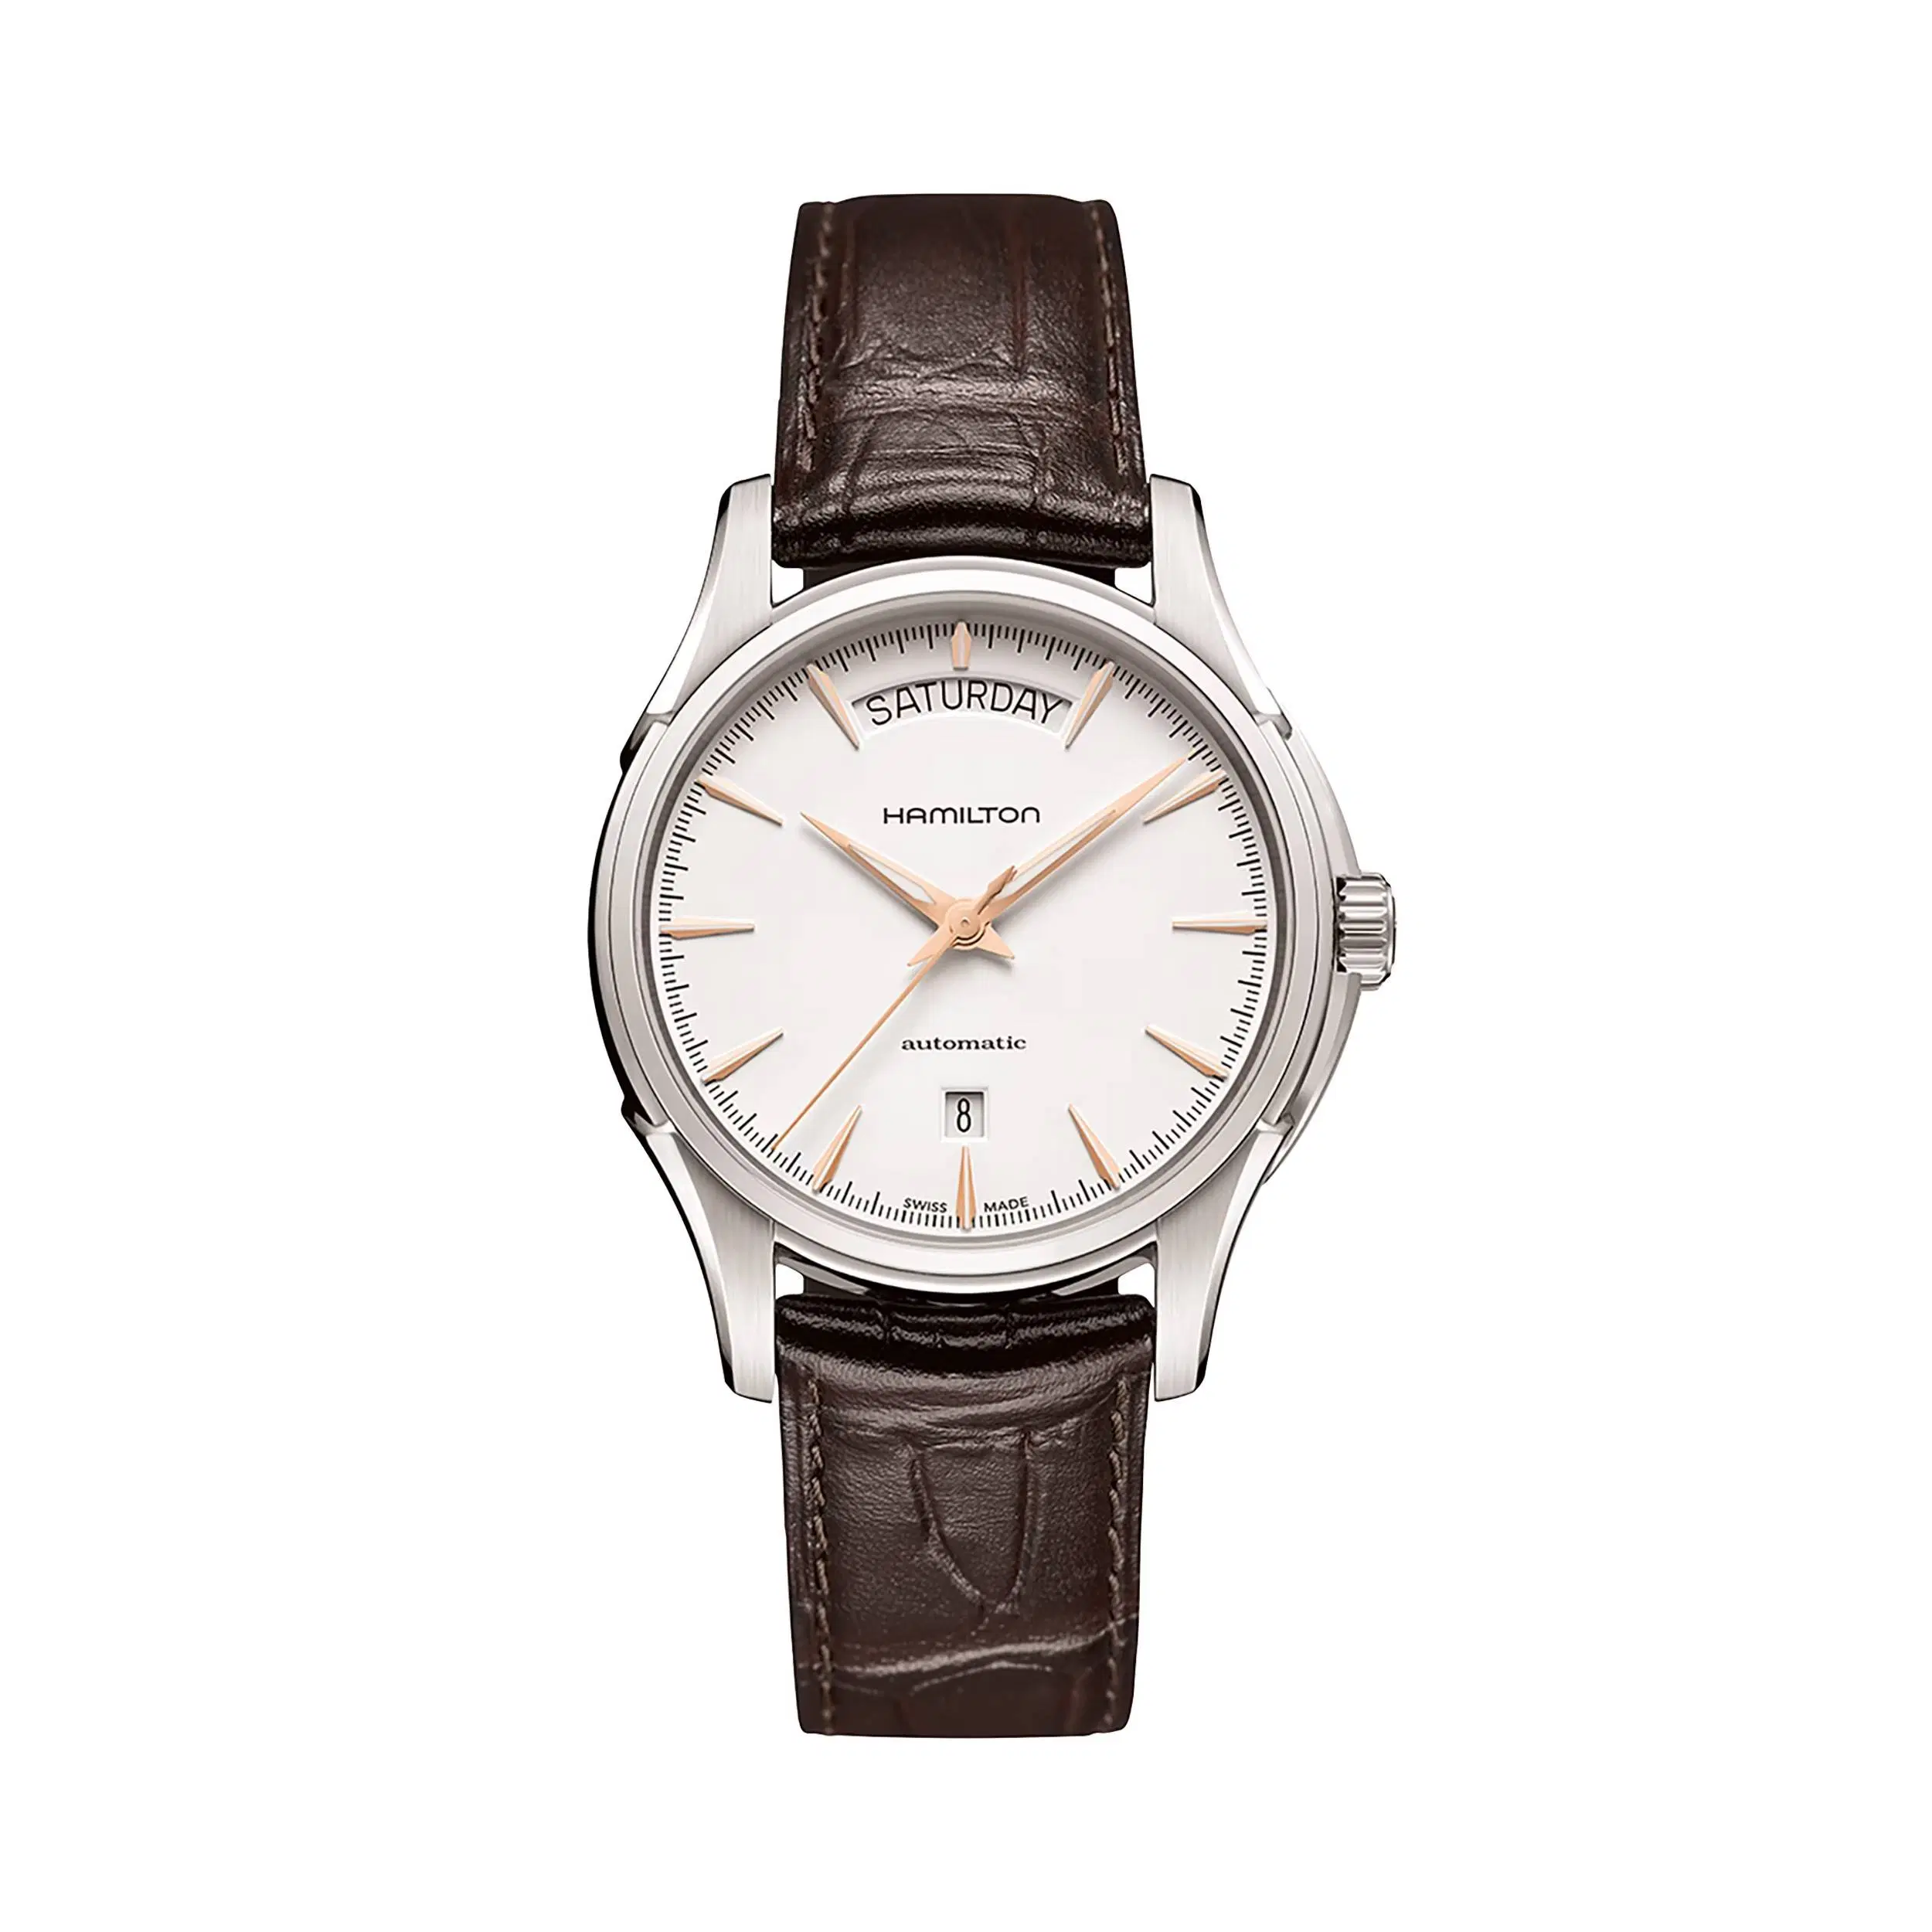 Hamilton Jazzmaster Day Date Auto with Leather Strap 0